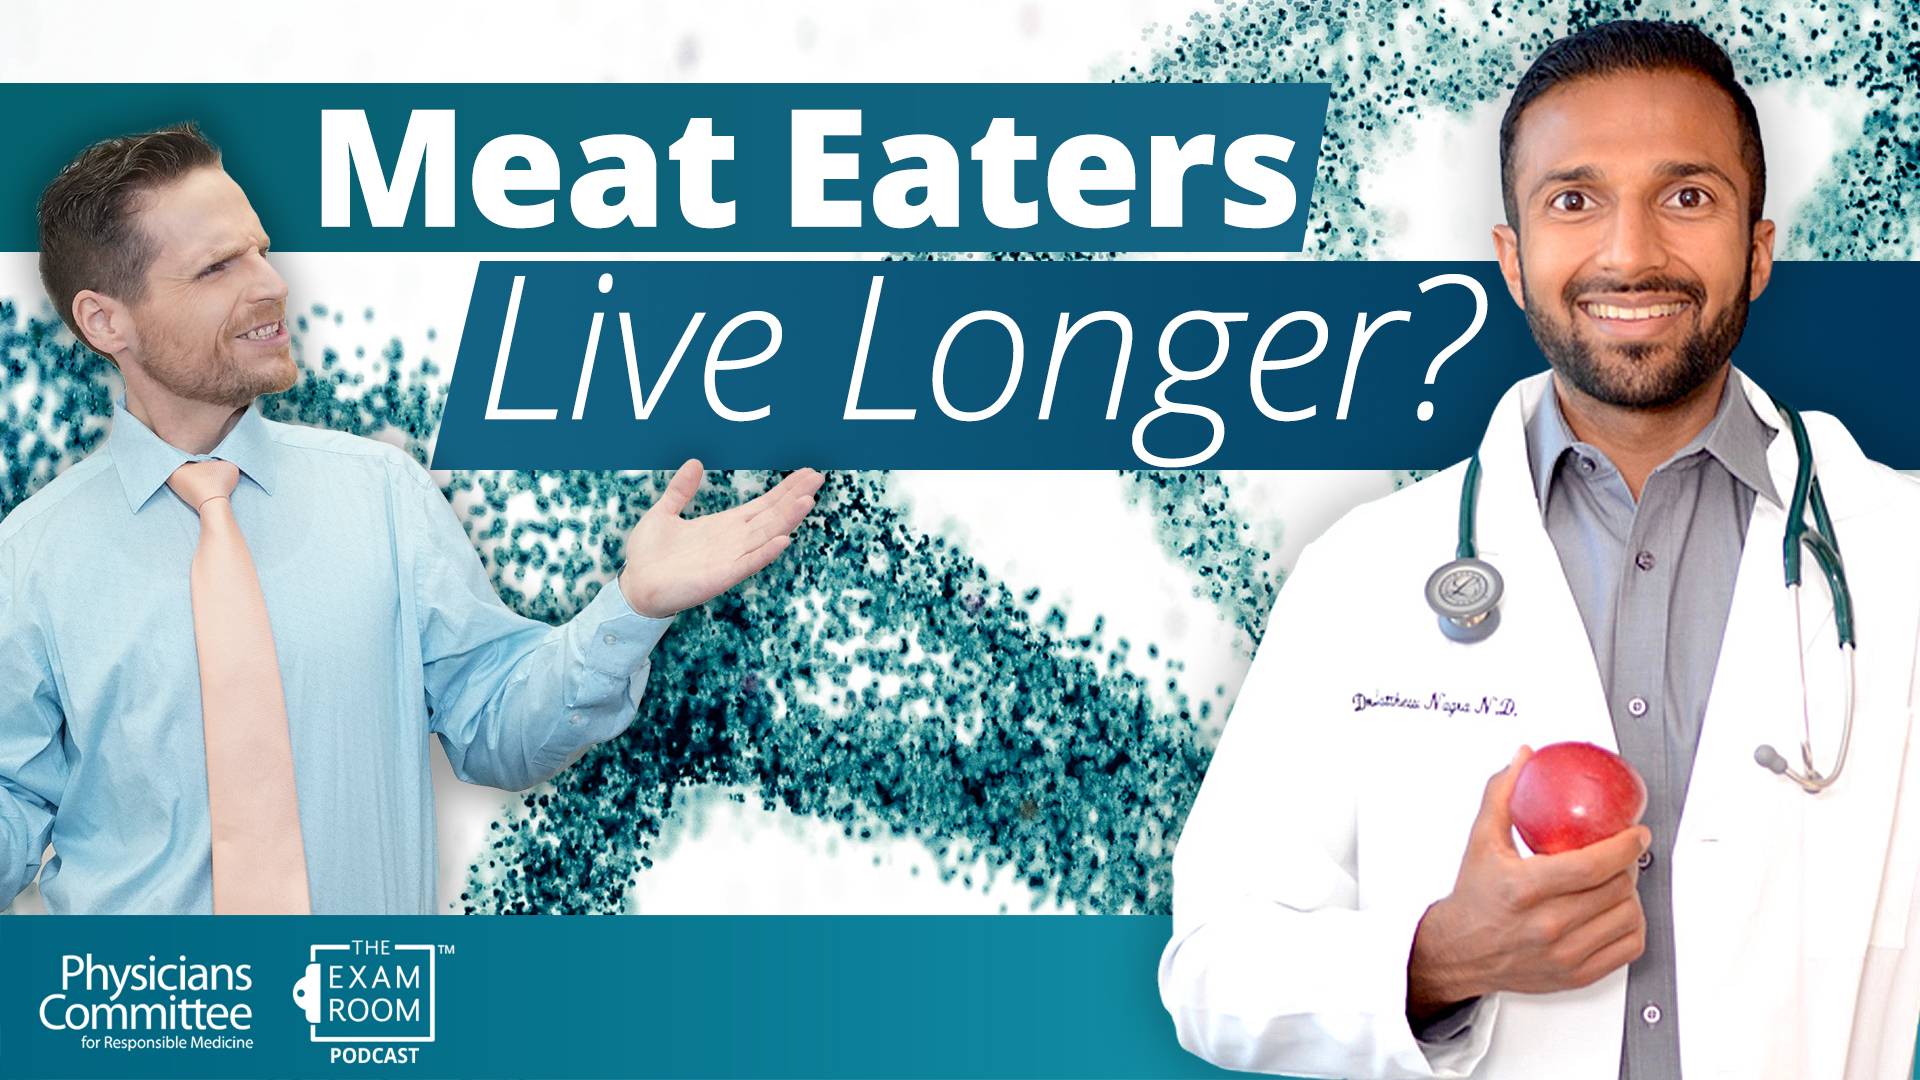 Eat Meat to Live Longer?